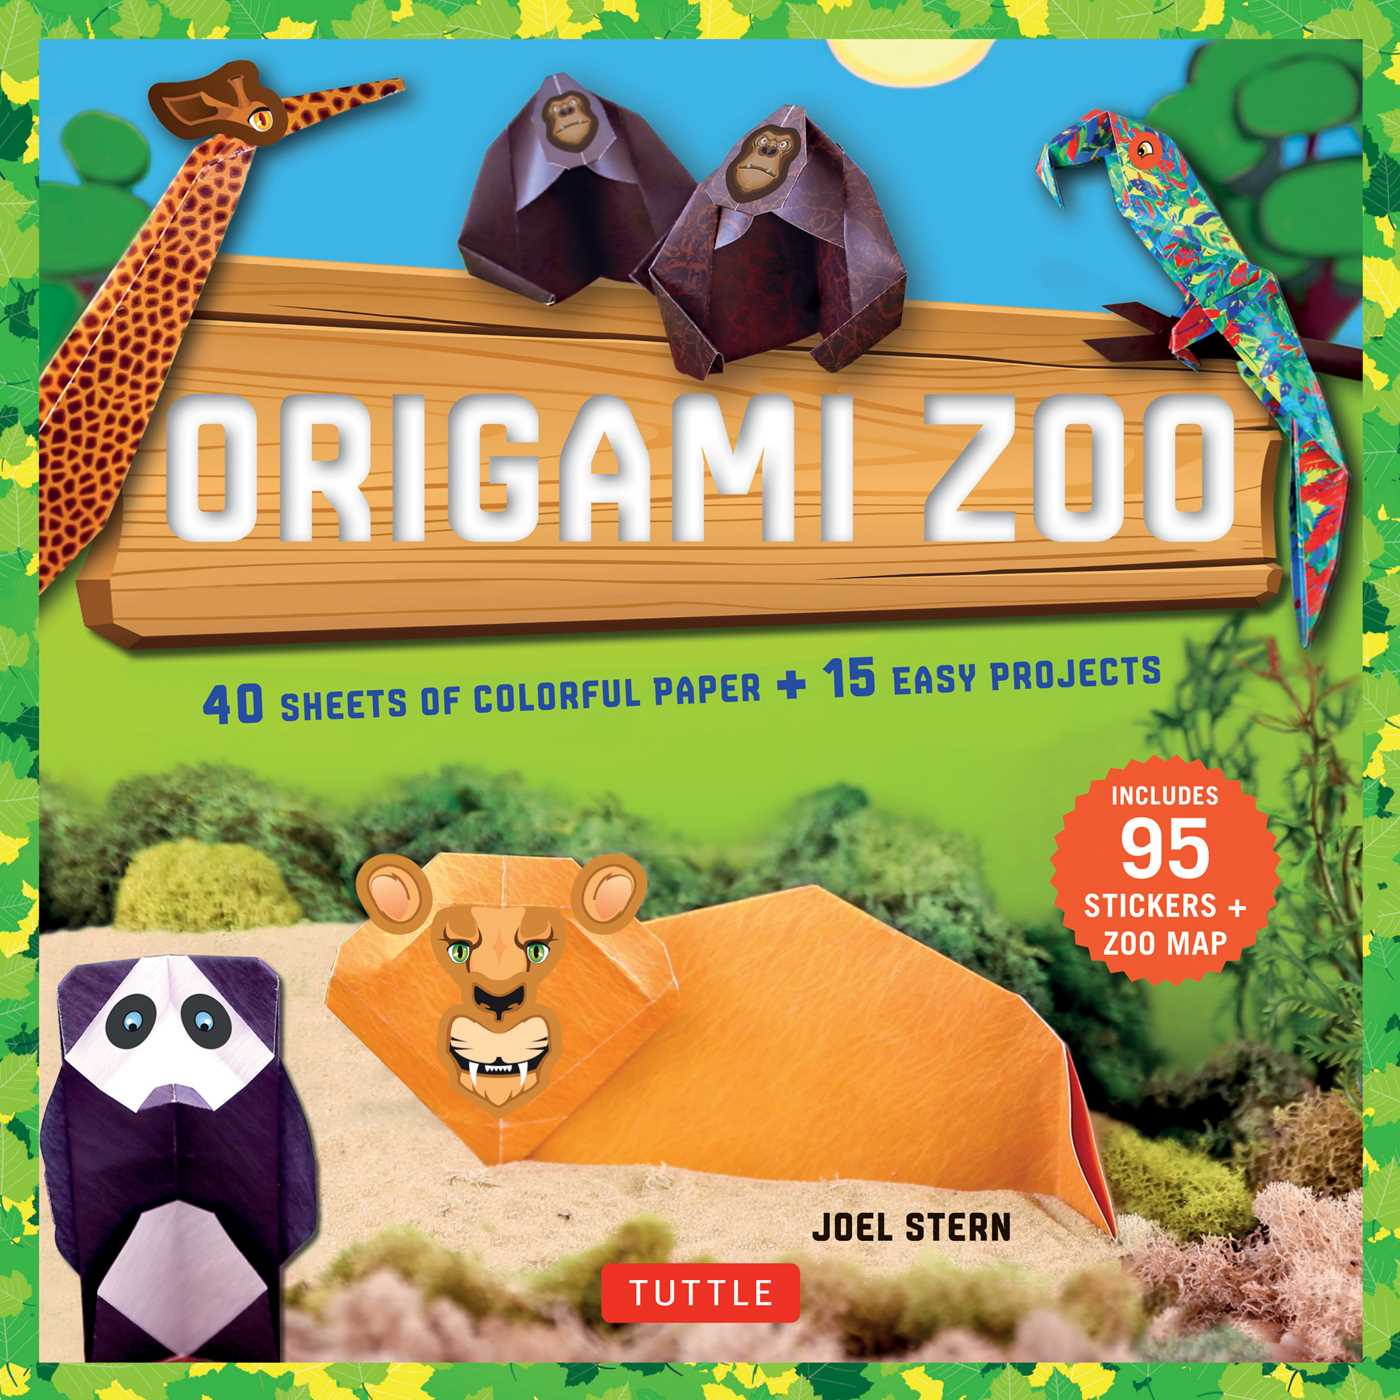 The Complete Book Of Origami Animals Origami Zoo Kit Make A Complete Zoo Of Origami Animals Kit With Origami Book 15 Projects 40 Origami Papers 95 Stickers Fold Out Zoo Map